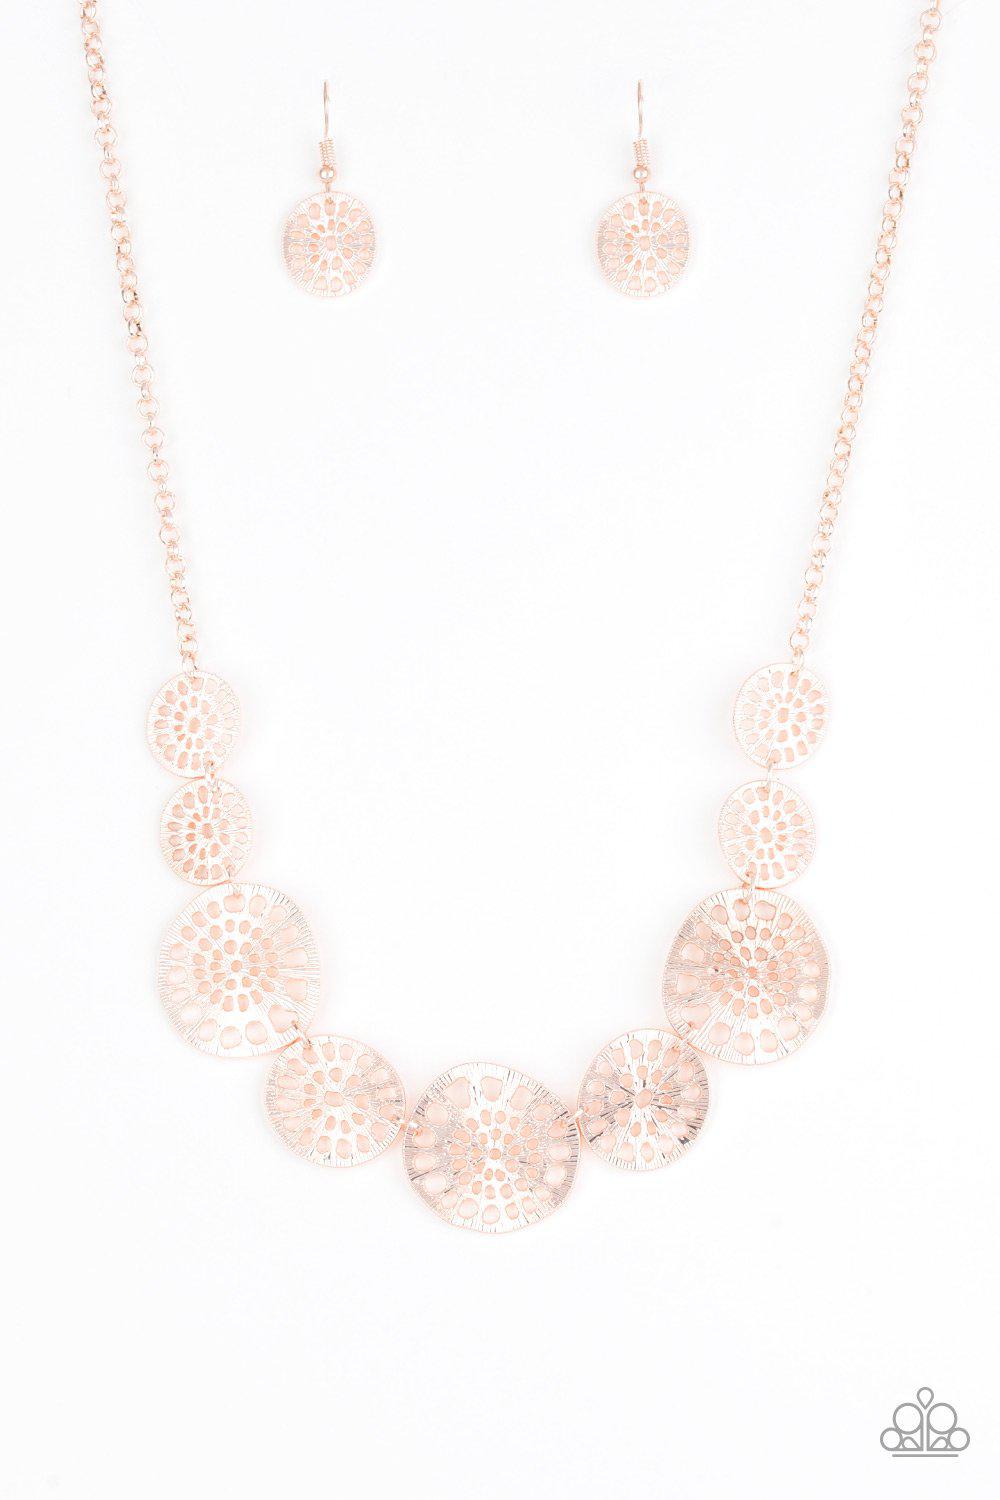 Your Own Free WHEEL Rose Gold Necklace - Paparazzi Accessories - lightbox -CarasShop.com - $5 Jewelry by Cara Jewels